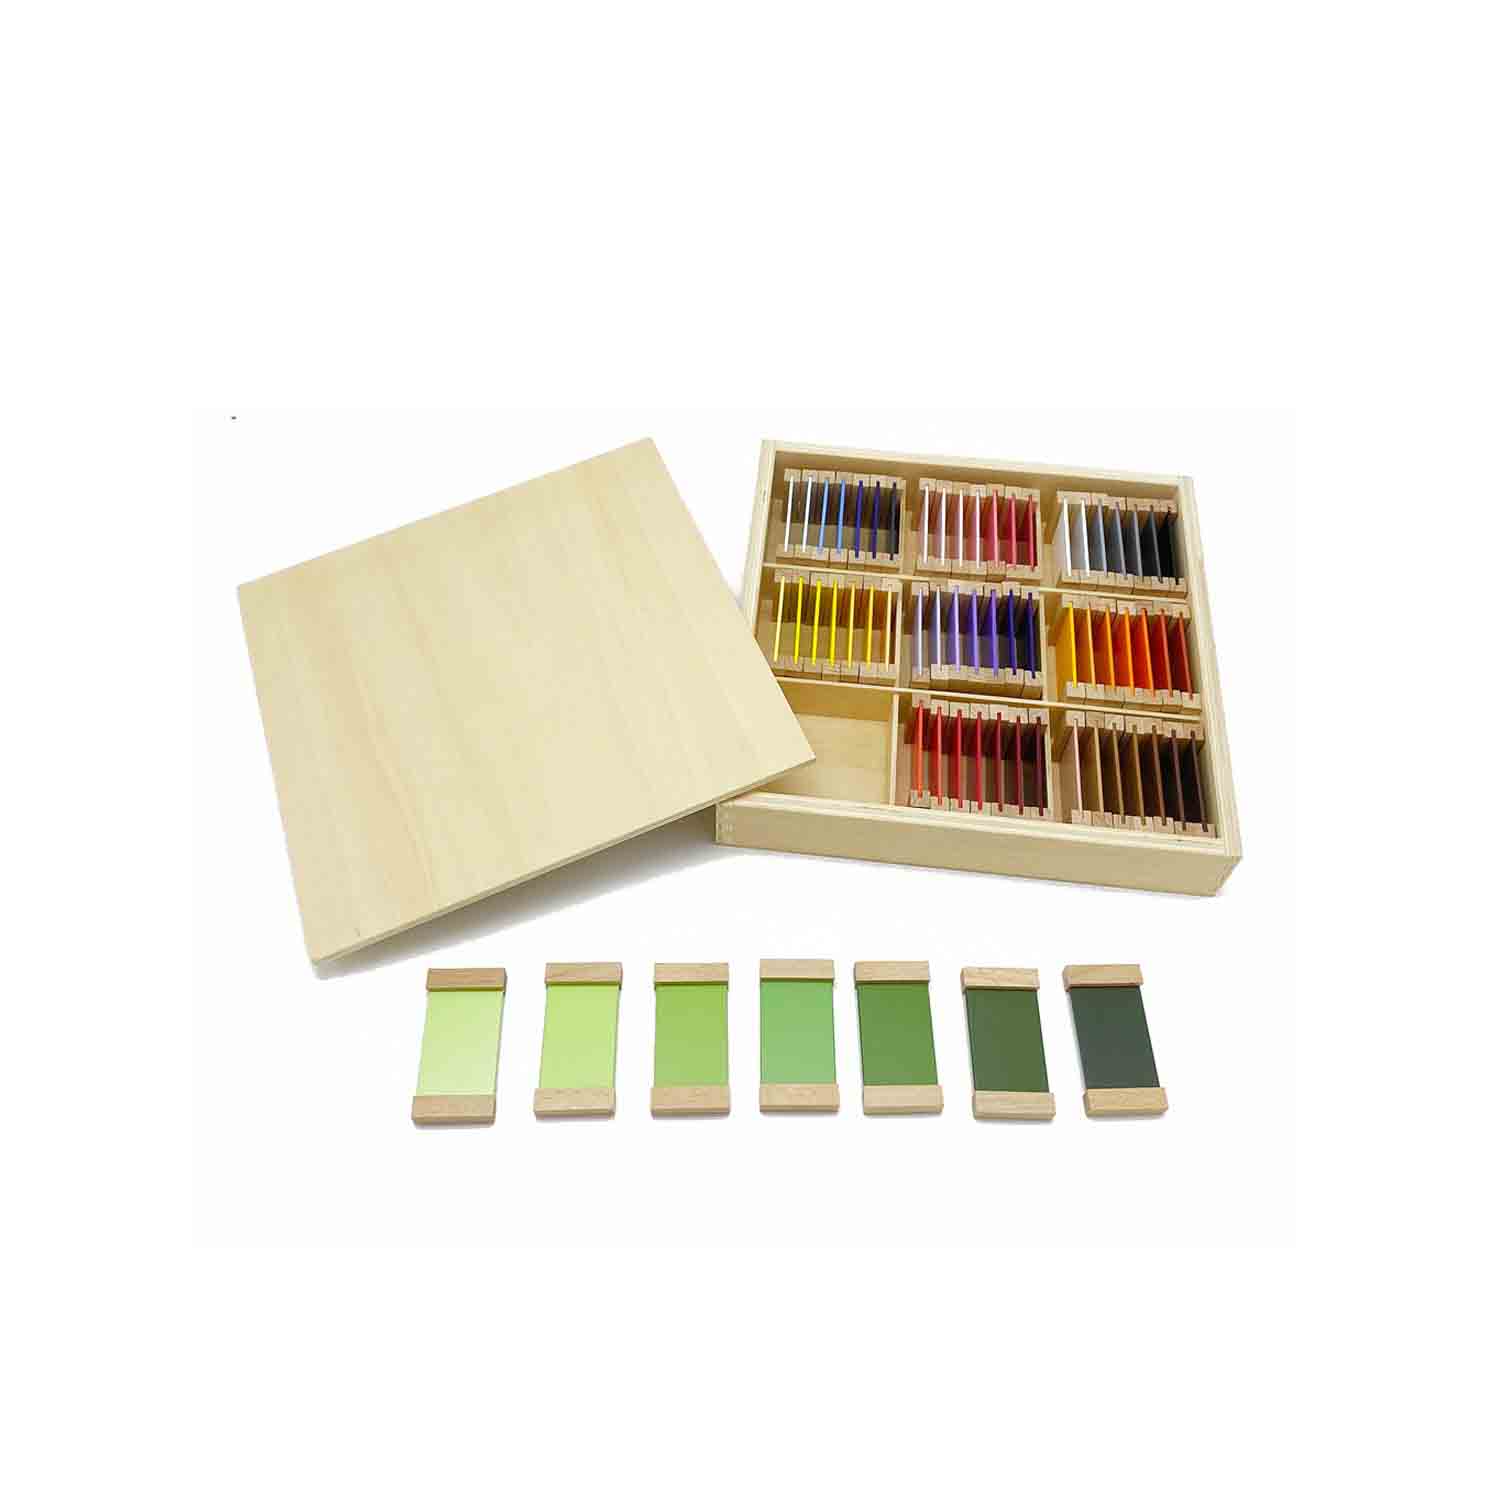 Third Box Of Wooden Color Tablets